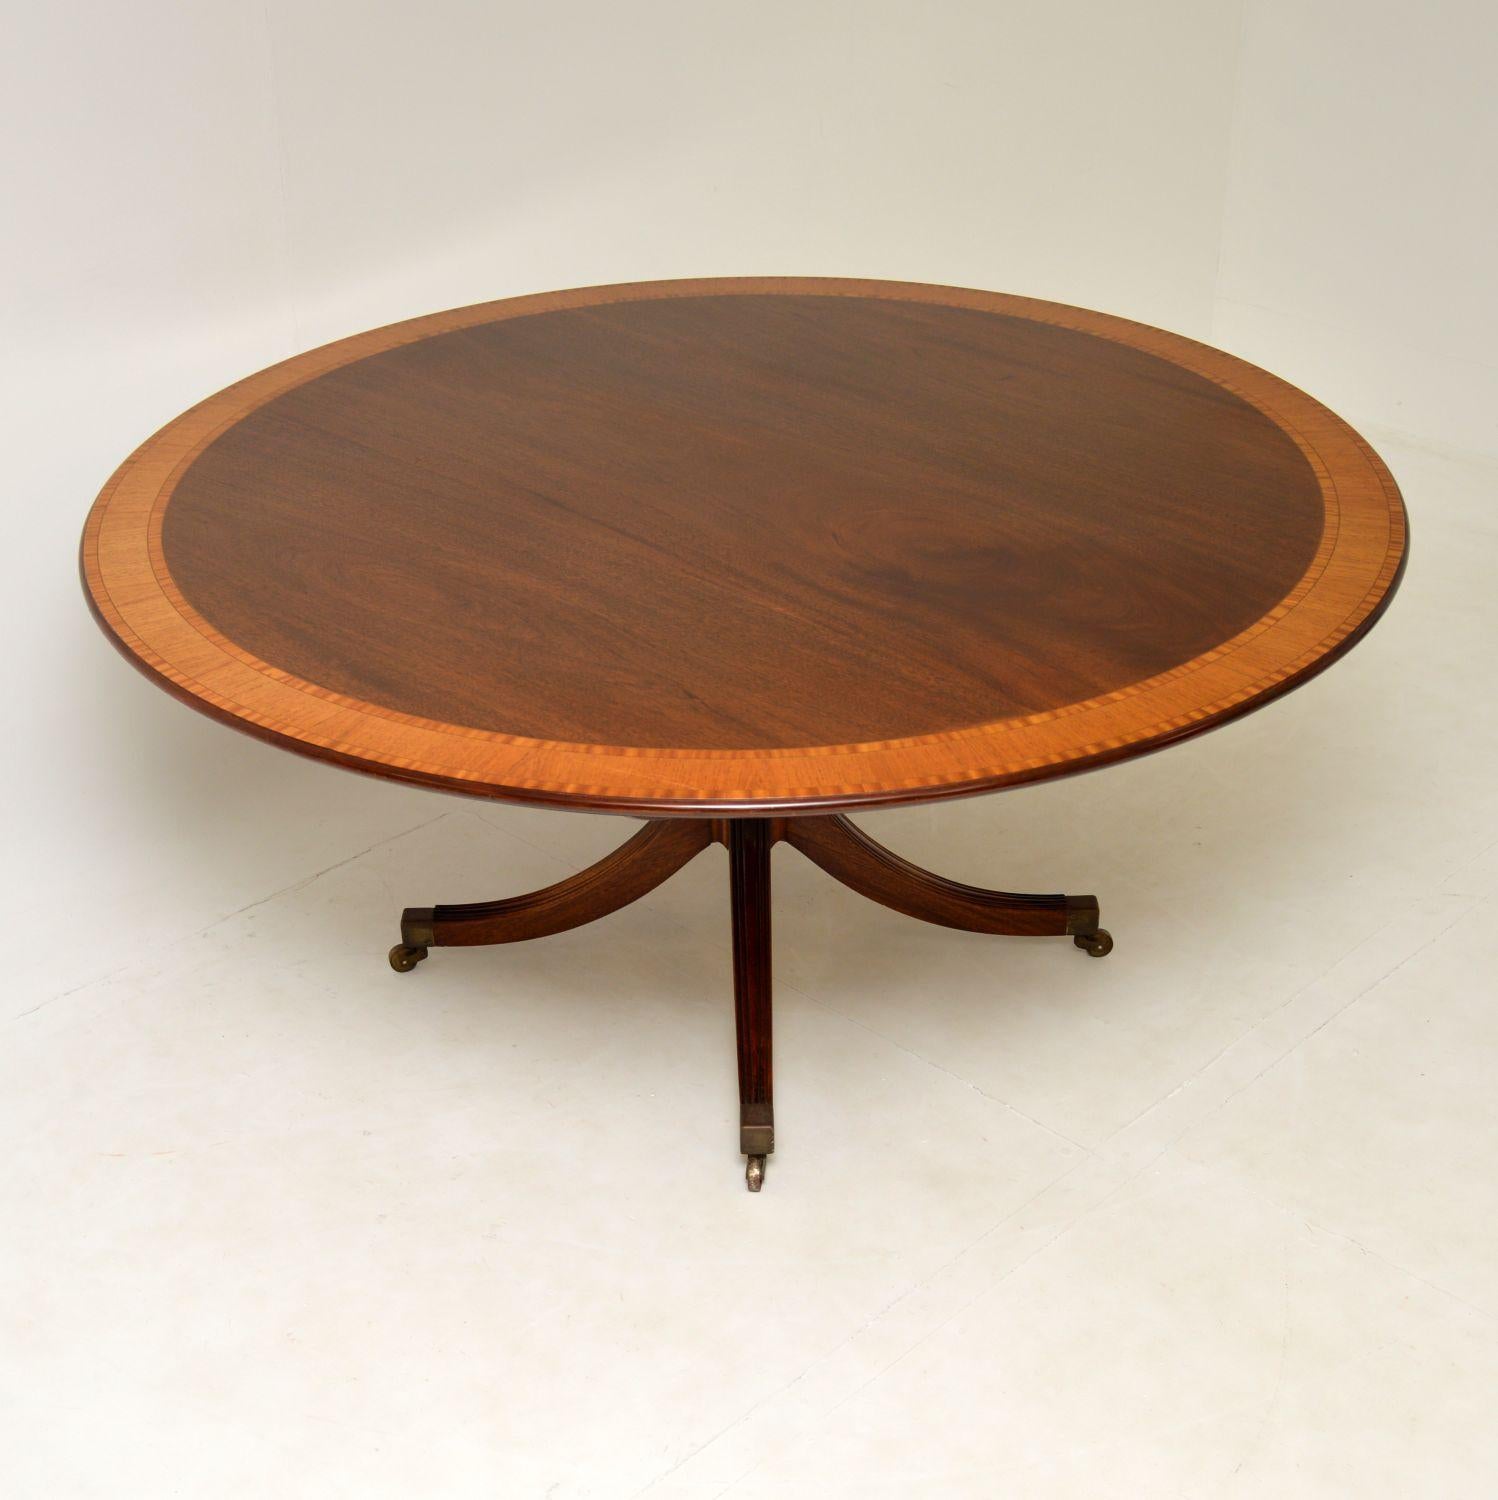 William Tillman was making fine reproduction furniture in the 1970’s and his work is considered to be of the highest quality and collected throughout the world. It has been sold in all of the famous London Stores including Harrods, Peter Jones and